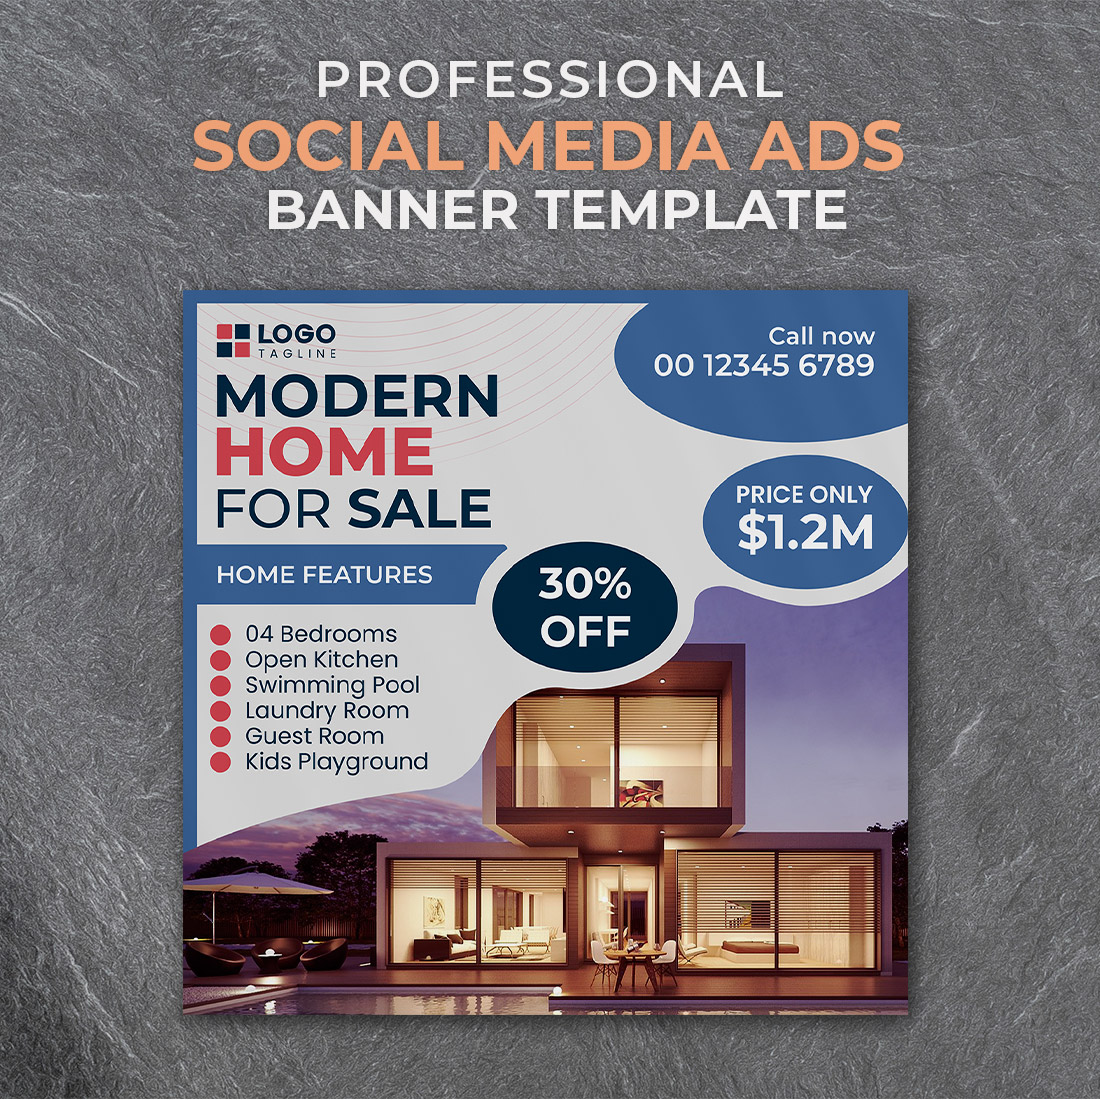 Professional & Creative Modern Home For Sale Social Media Ads Banner Design Template cover image.